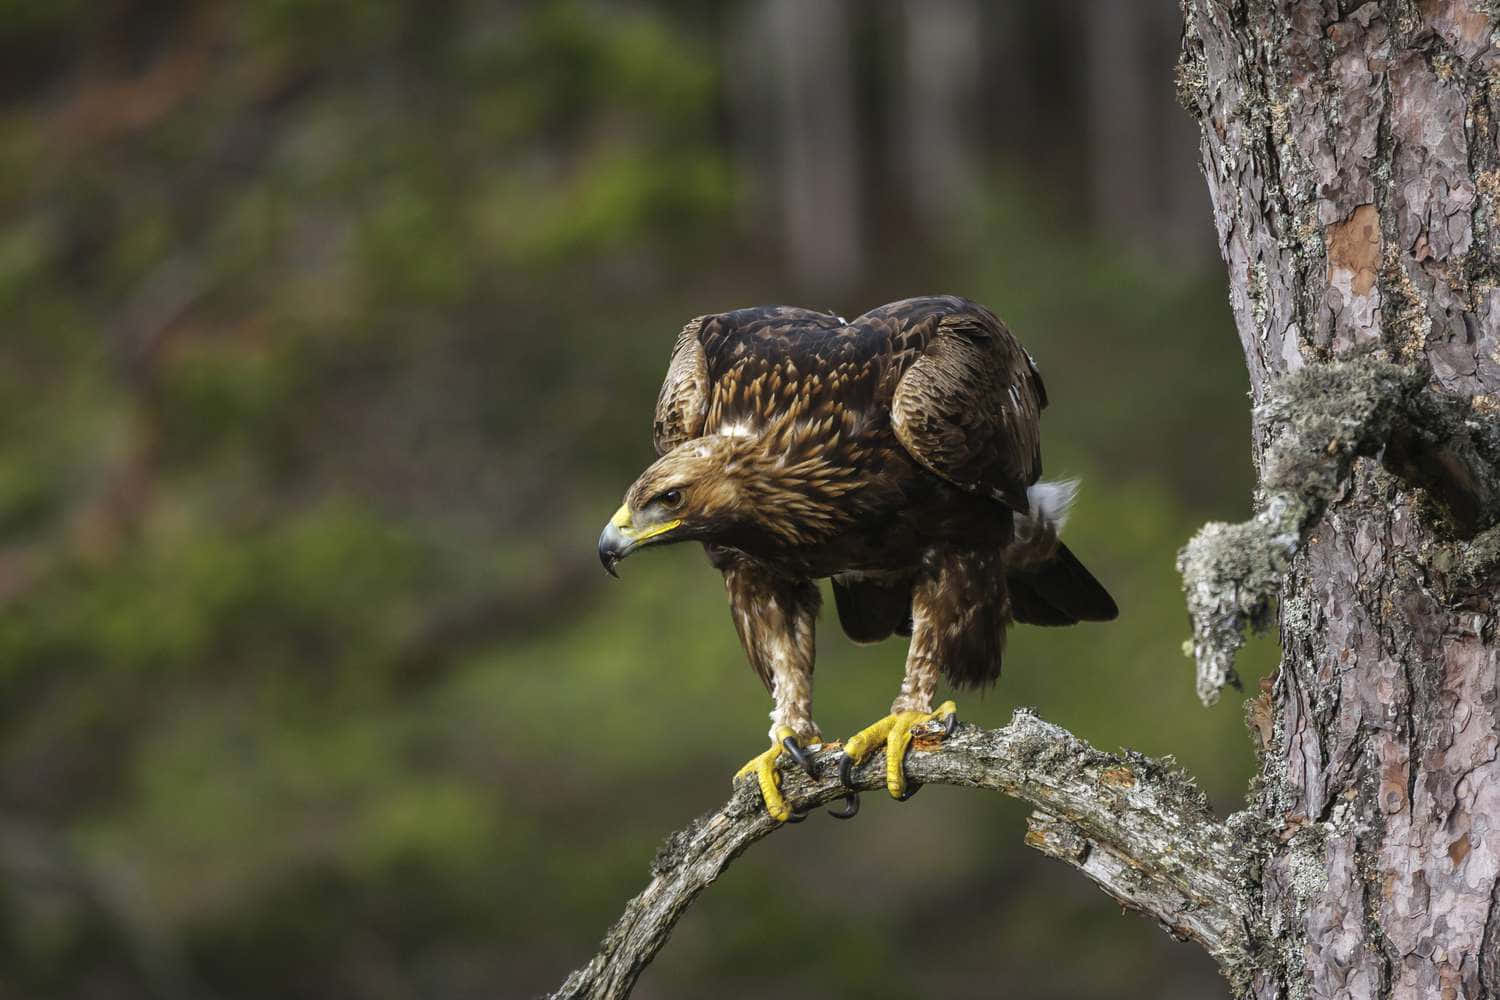 Witness the Courage and Majesty of a Young Eagle